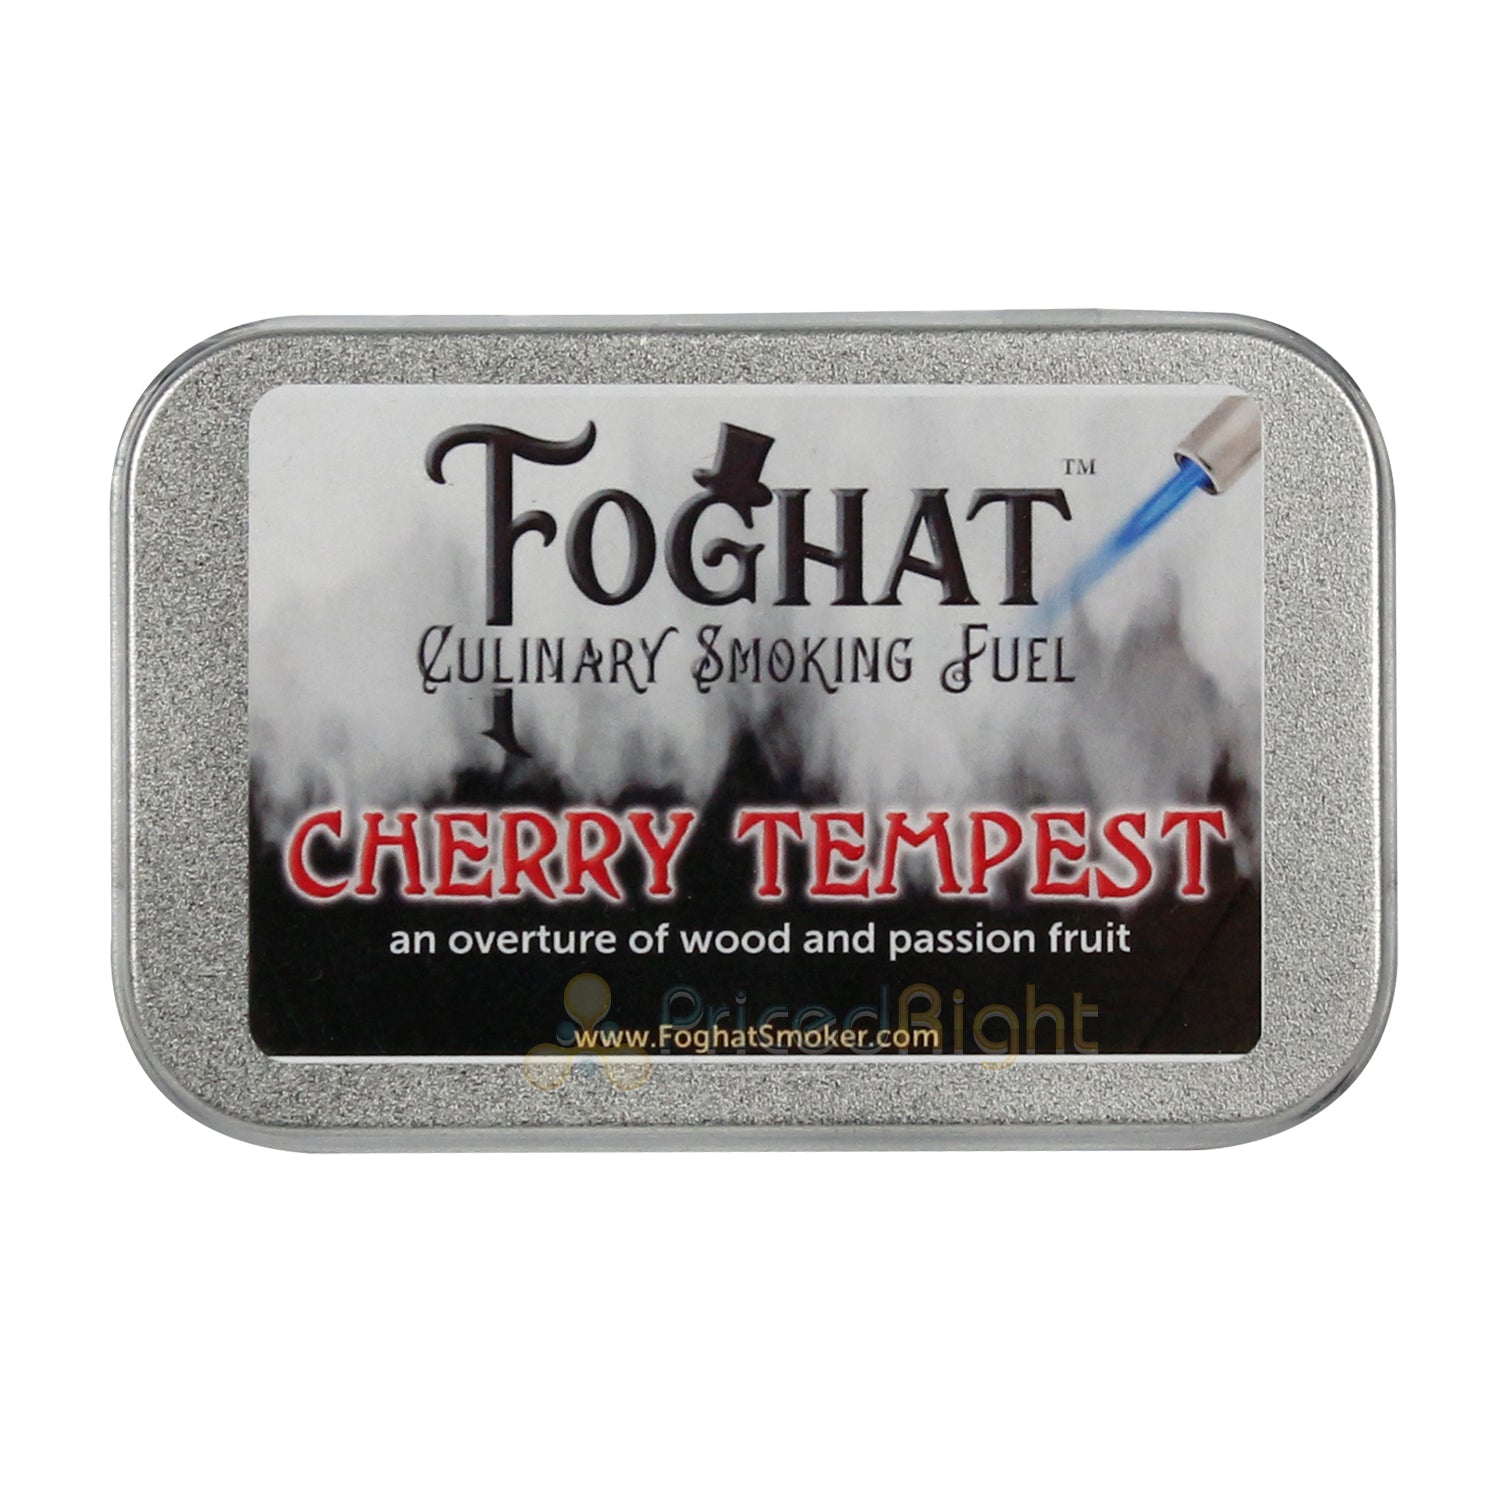 Foghat Culinary Smoking Fuel Cherry Tempest Sweet & Mild Flavor W/ Passion Fruit